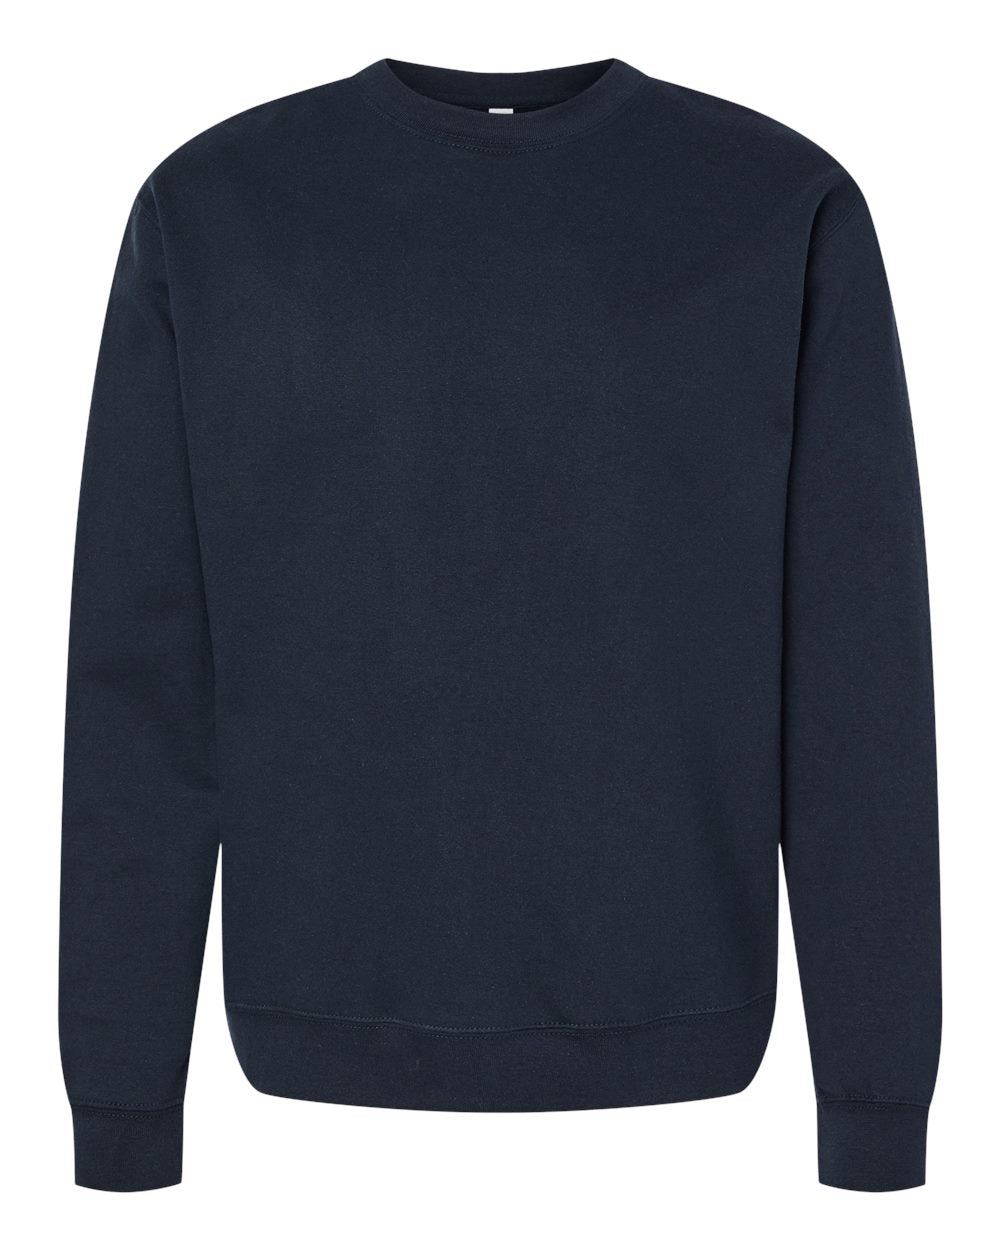 Independent Trading Co. Midweight Sweatshirt SS3000 #color_Classic Navy